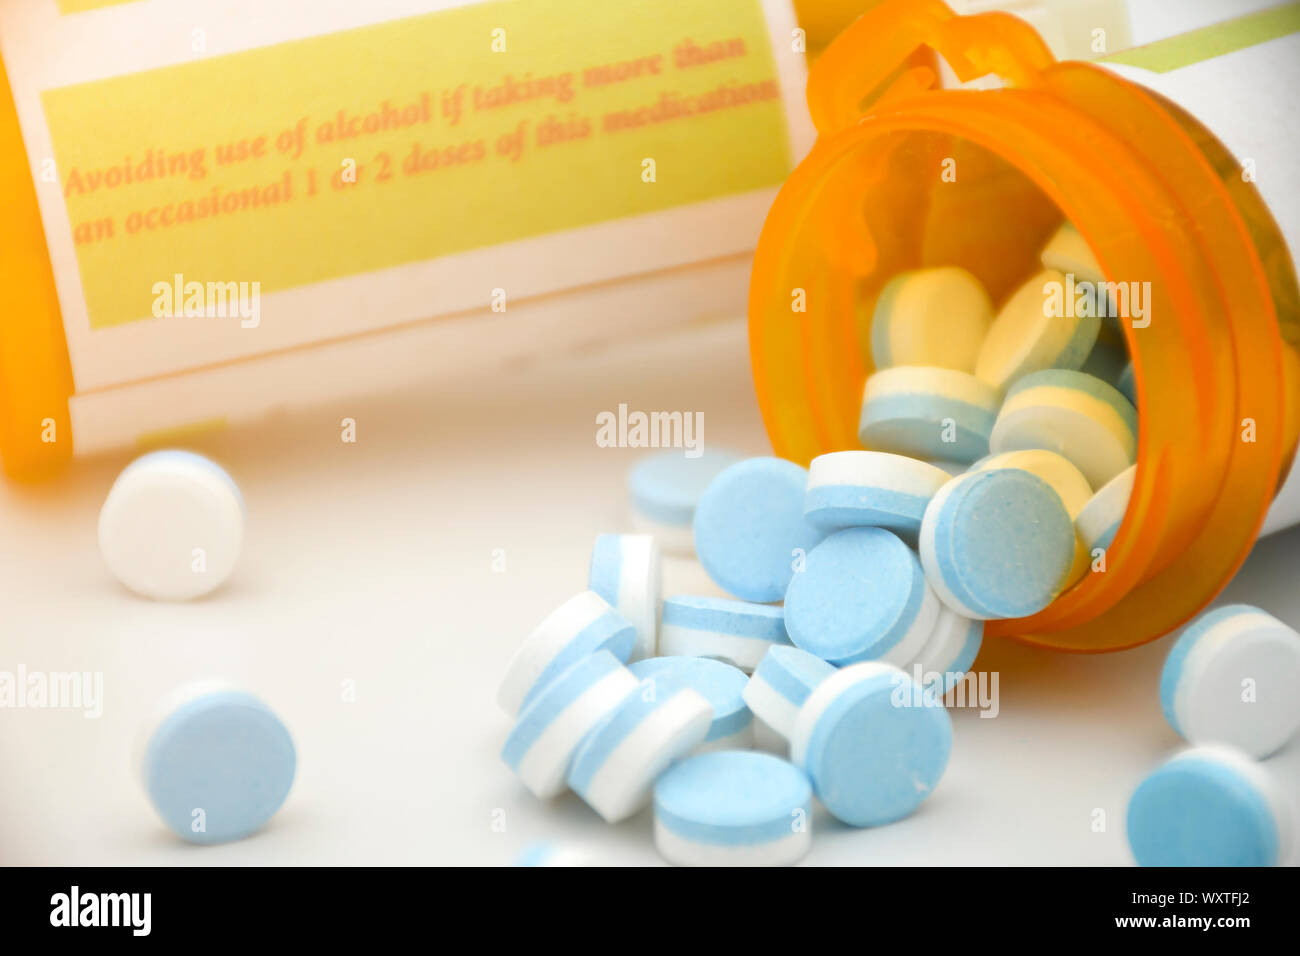 Paracetamol in blue and white plain compress tablets with caution on the bottle. Stock Photo